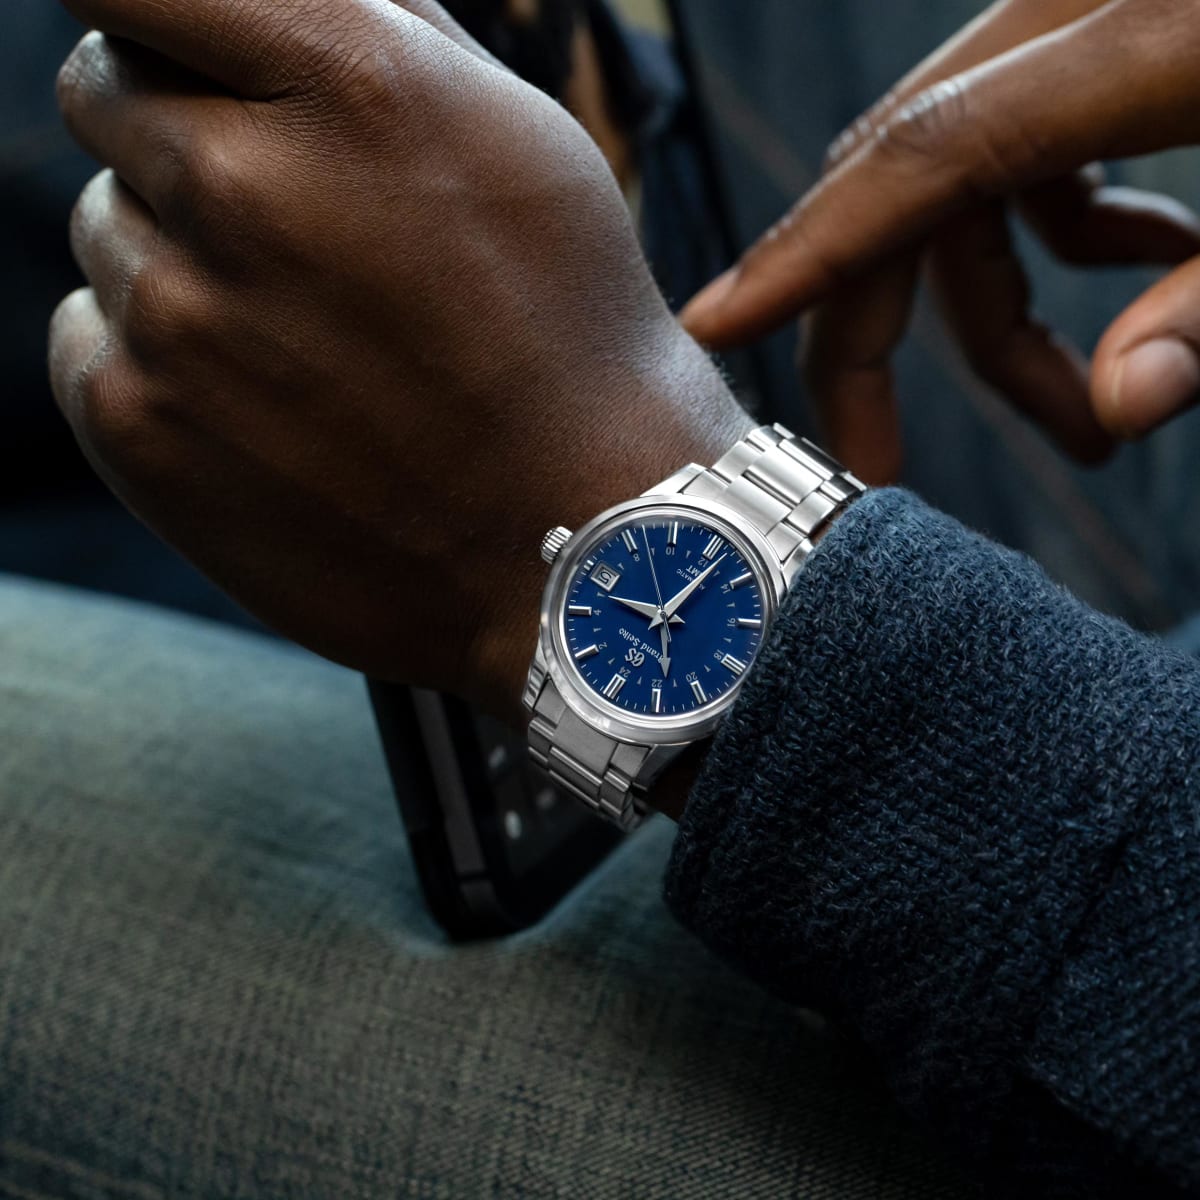 Hodinkee reveals its limited edition Grand Seiko Automatic GMT - Acquire